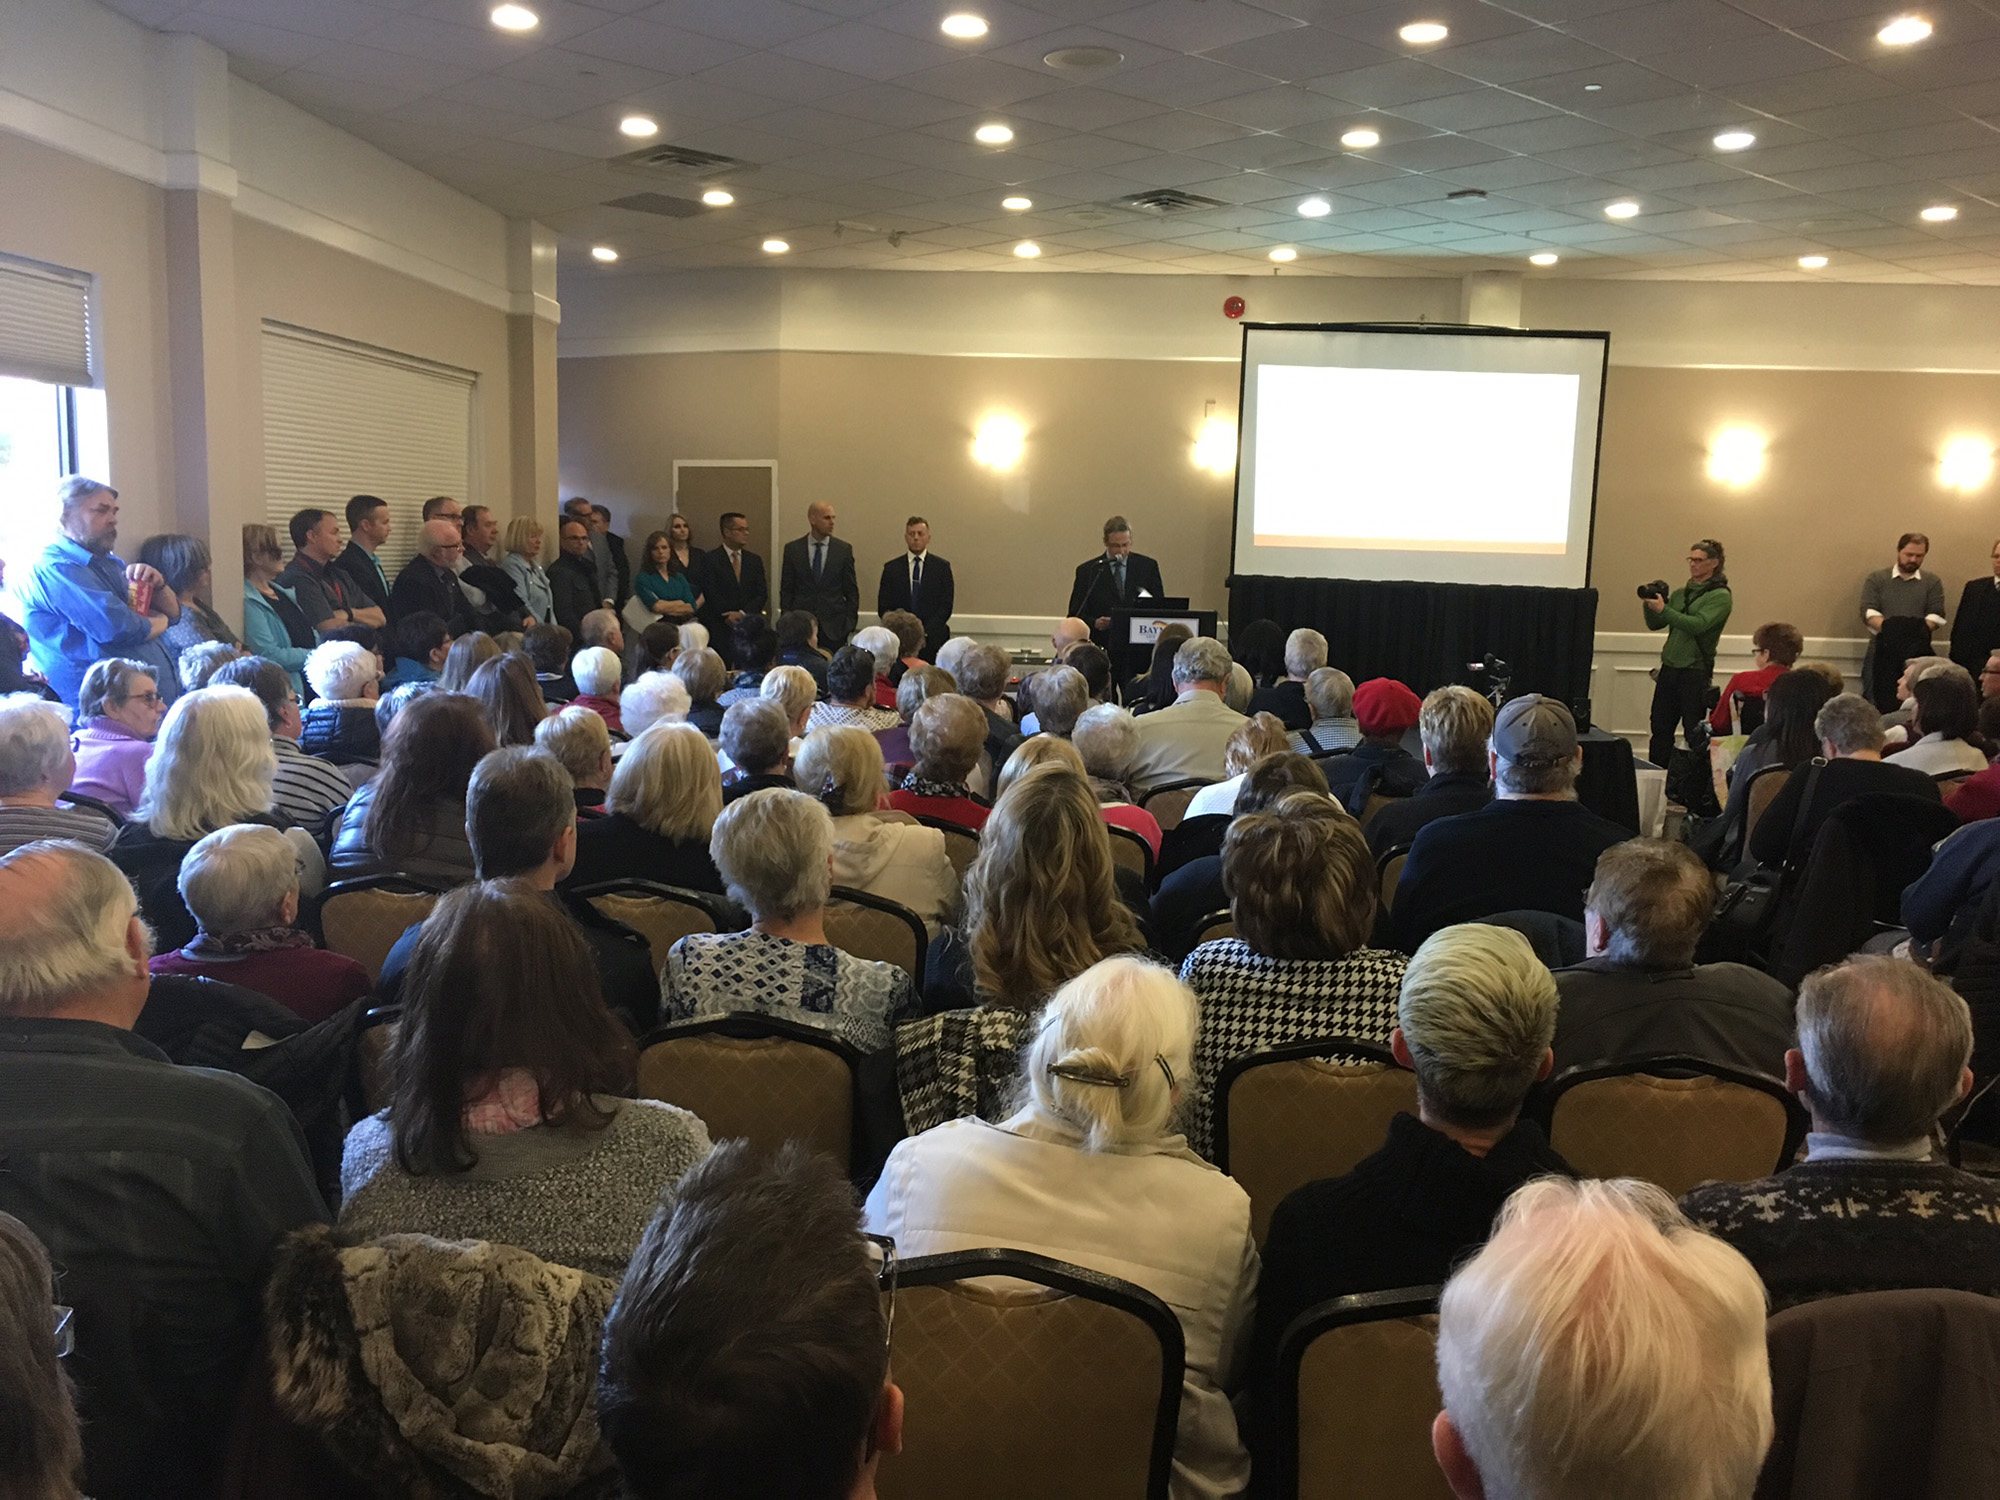 FULL HOUSE - It was standing room only for the ‘State of the Hospital Address’ held Tuesday afternoon at the Baymont Inn & Suites and Conference Centre. The event was hosted by a group called Diagnosis Critical - Your Central Alberta Regional Hospital.